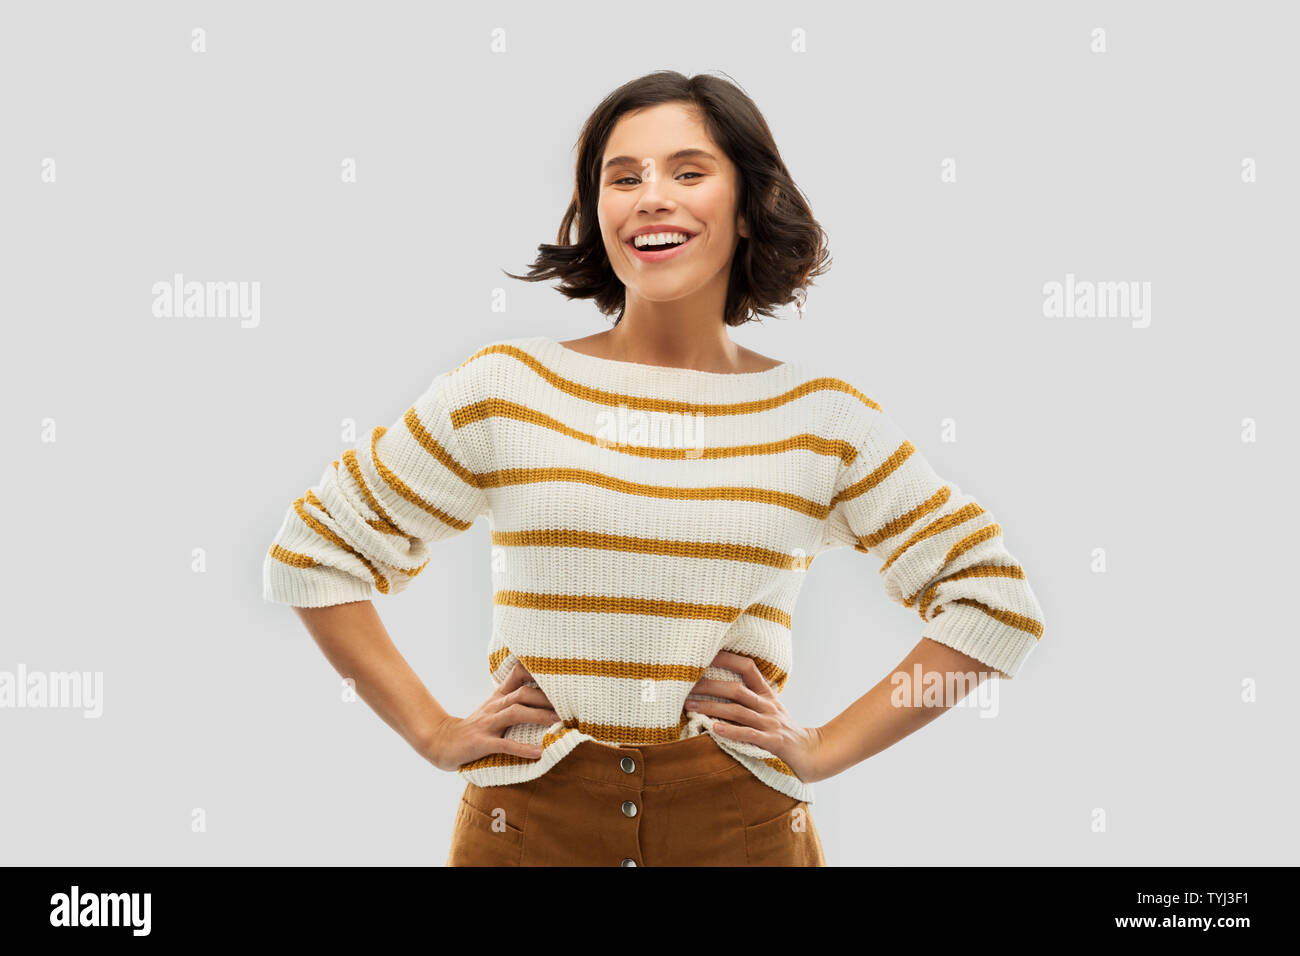 smiling woman in pullover with hands on hips Stock Photo